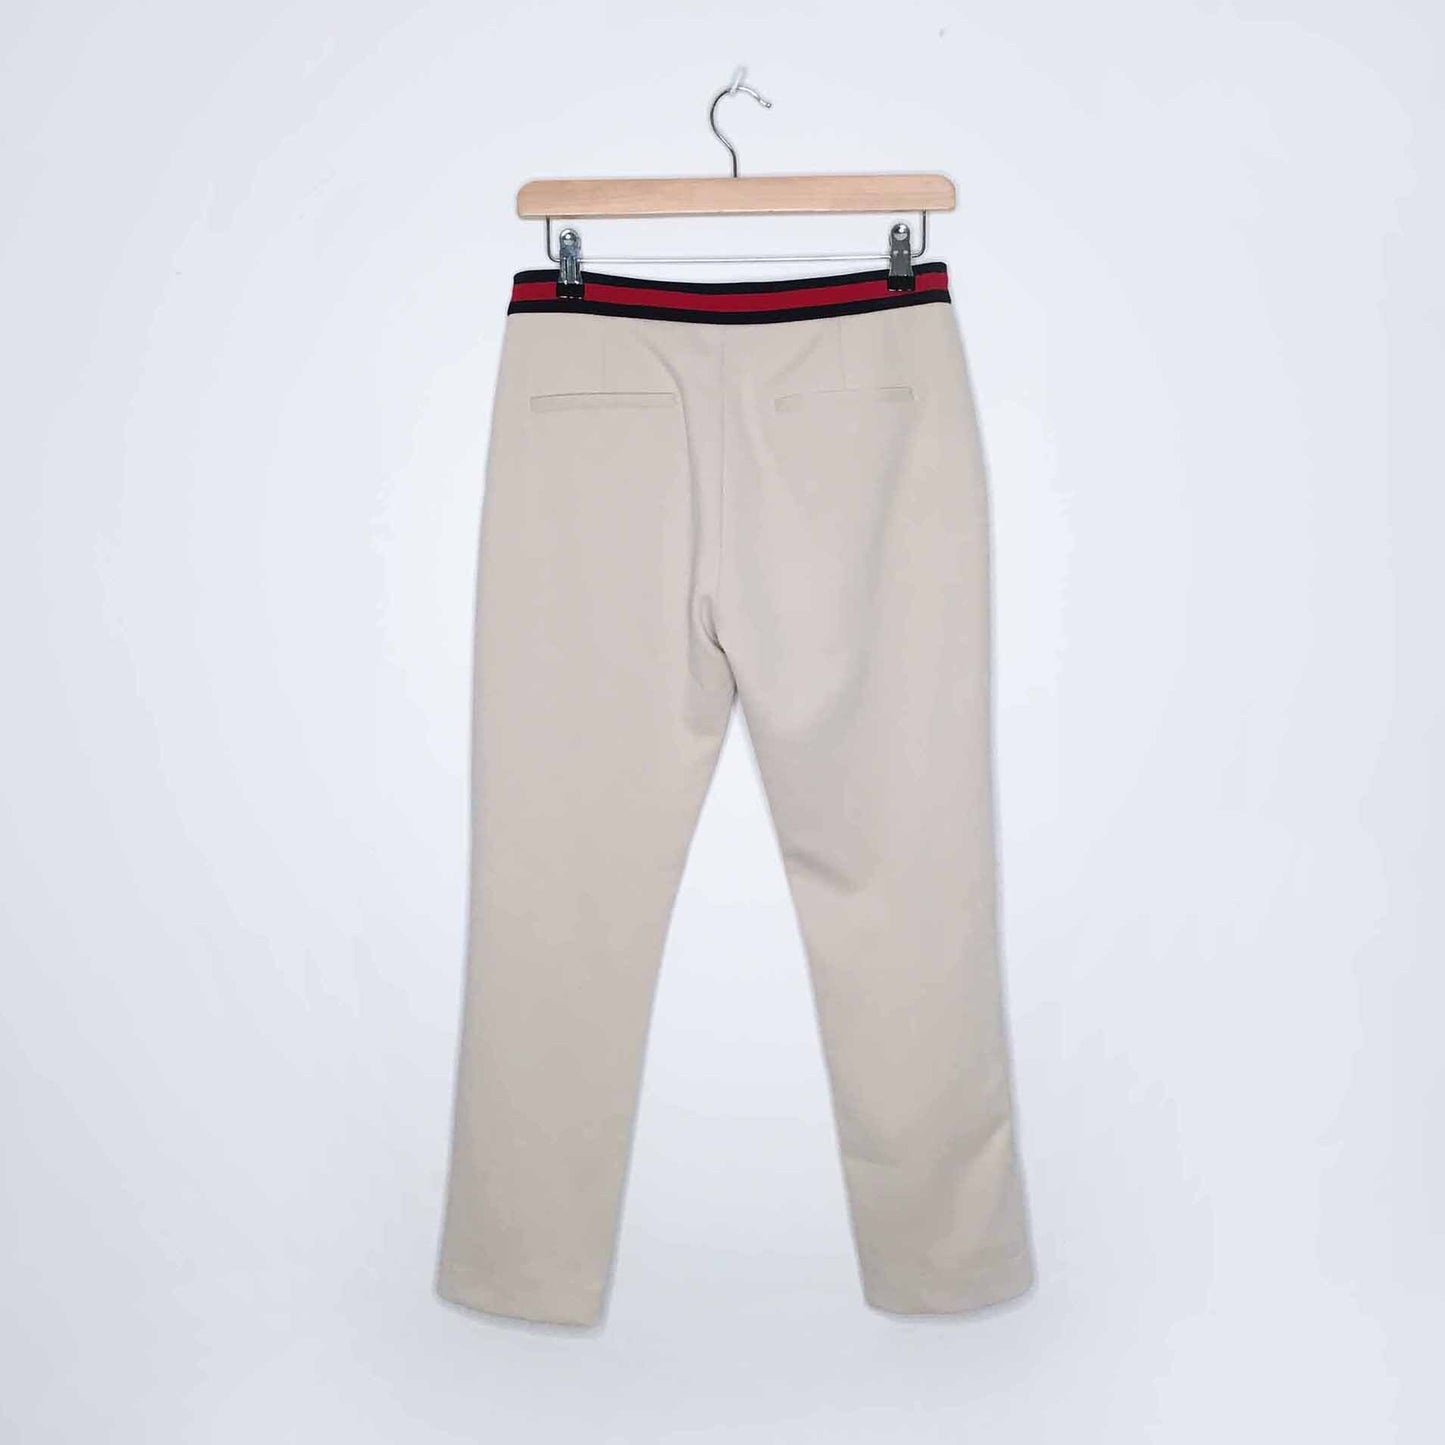 Gucci high rise crop trouser with striped waistband - size 38